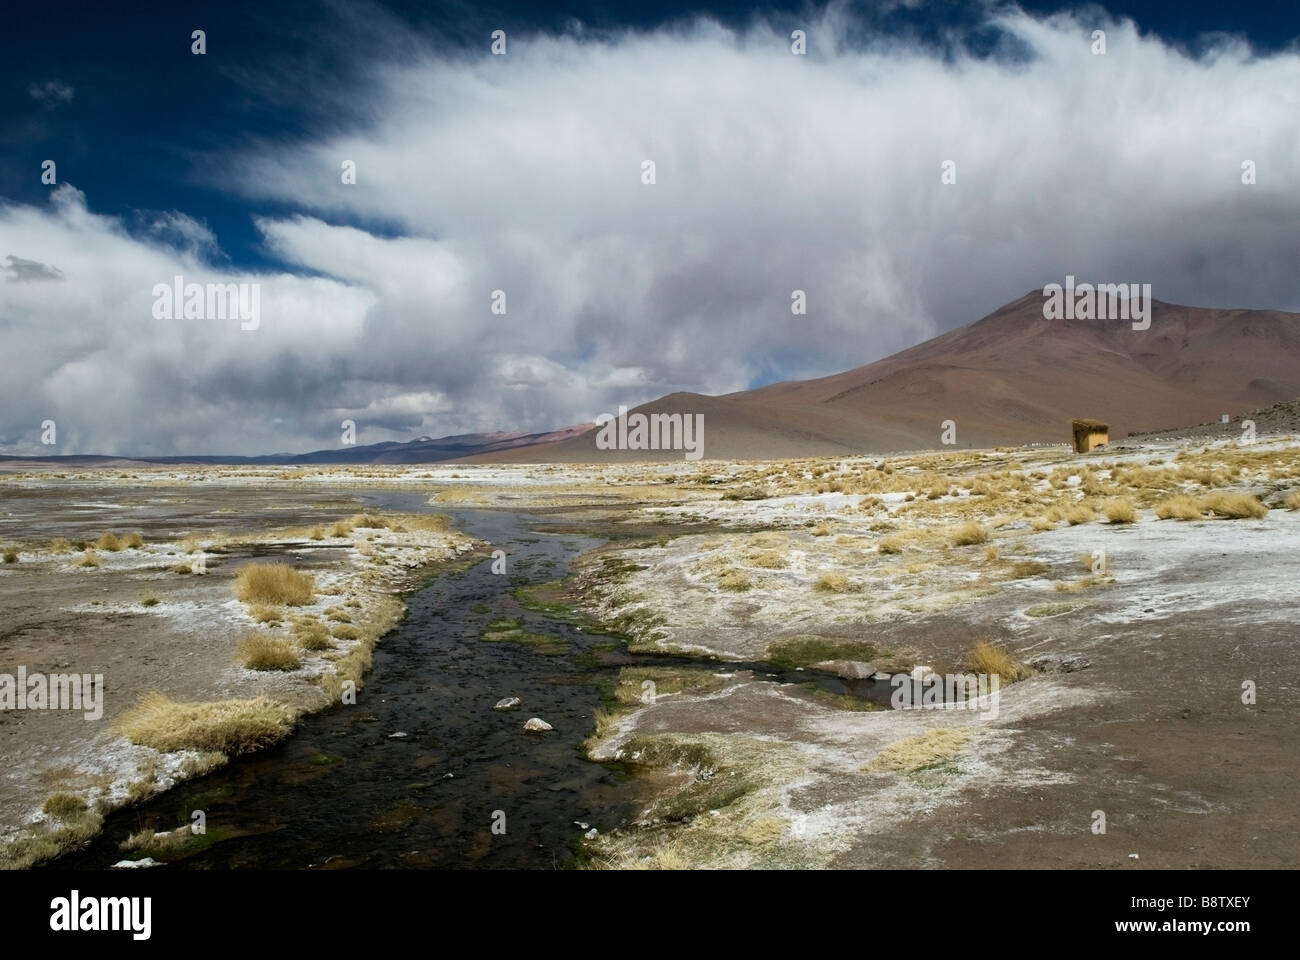 Striking clouds swirl above the hills surrounding the thermal pools of Termas de Polques high on the Bolivian Altiplano. Stock Photo